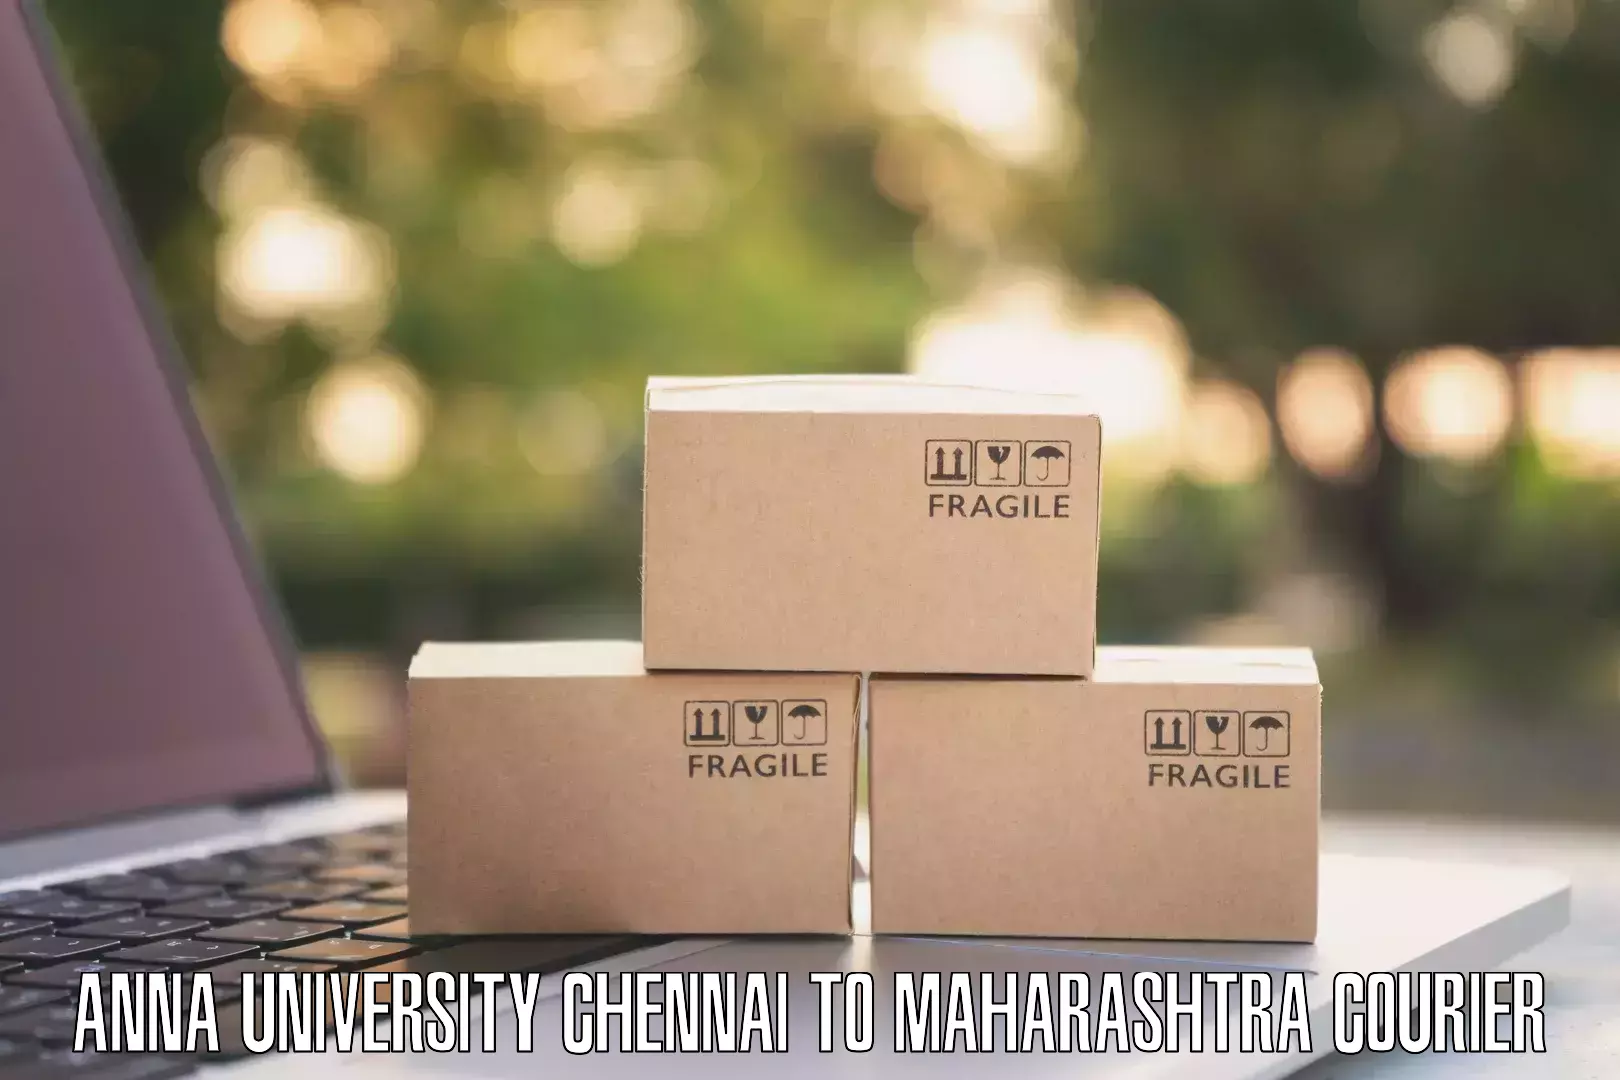 Business delivery service Anna University Chennai to Shegaon